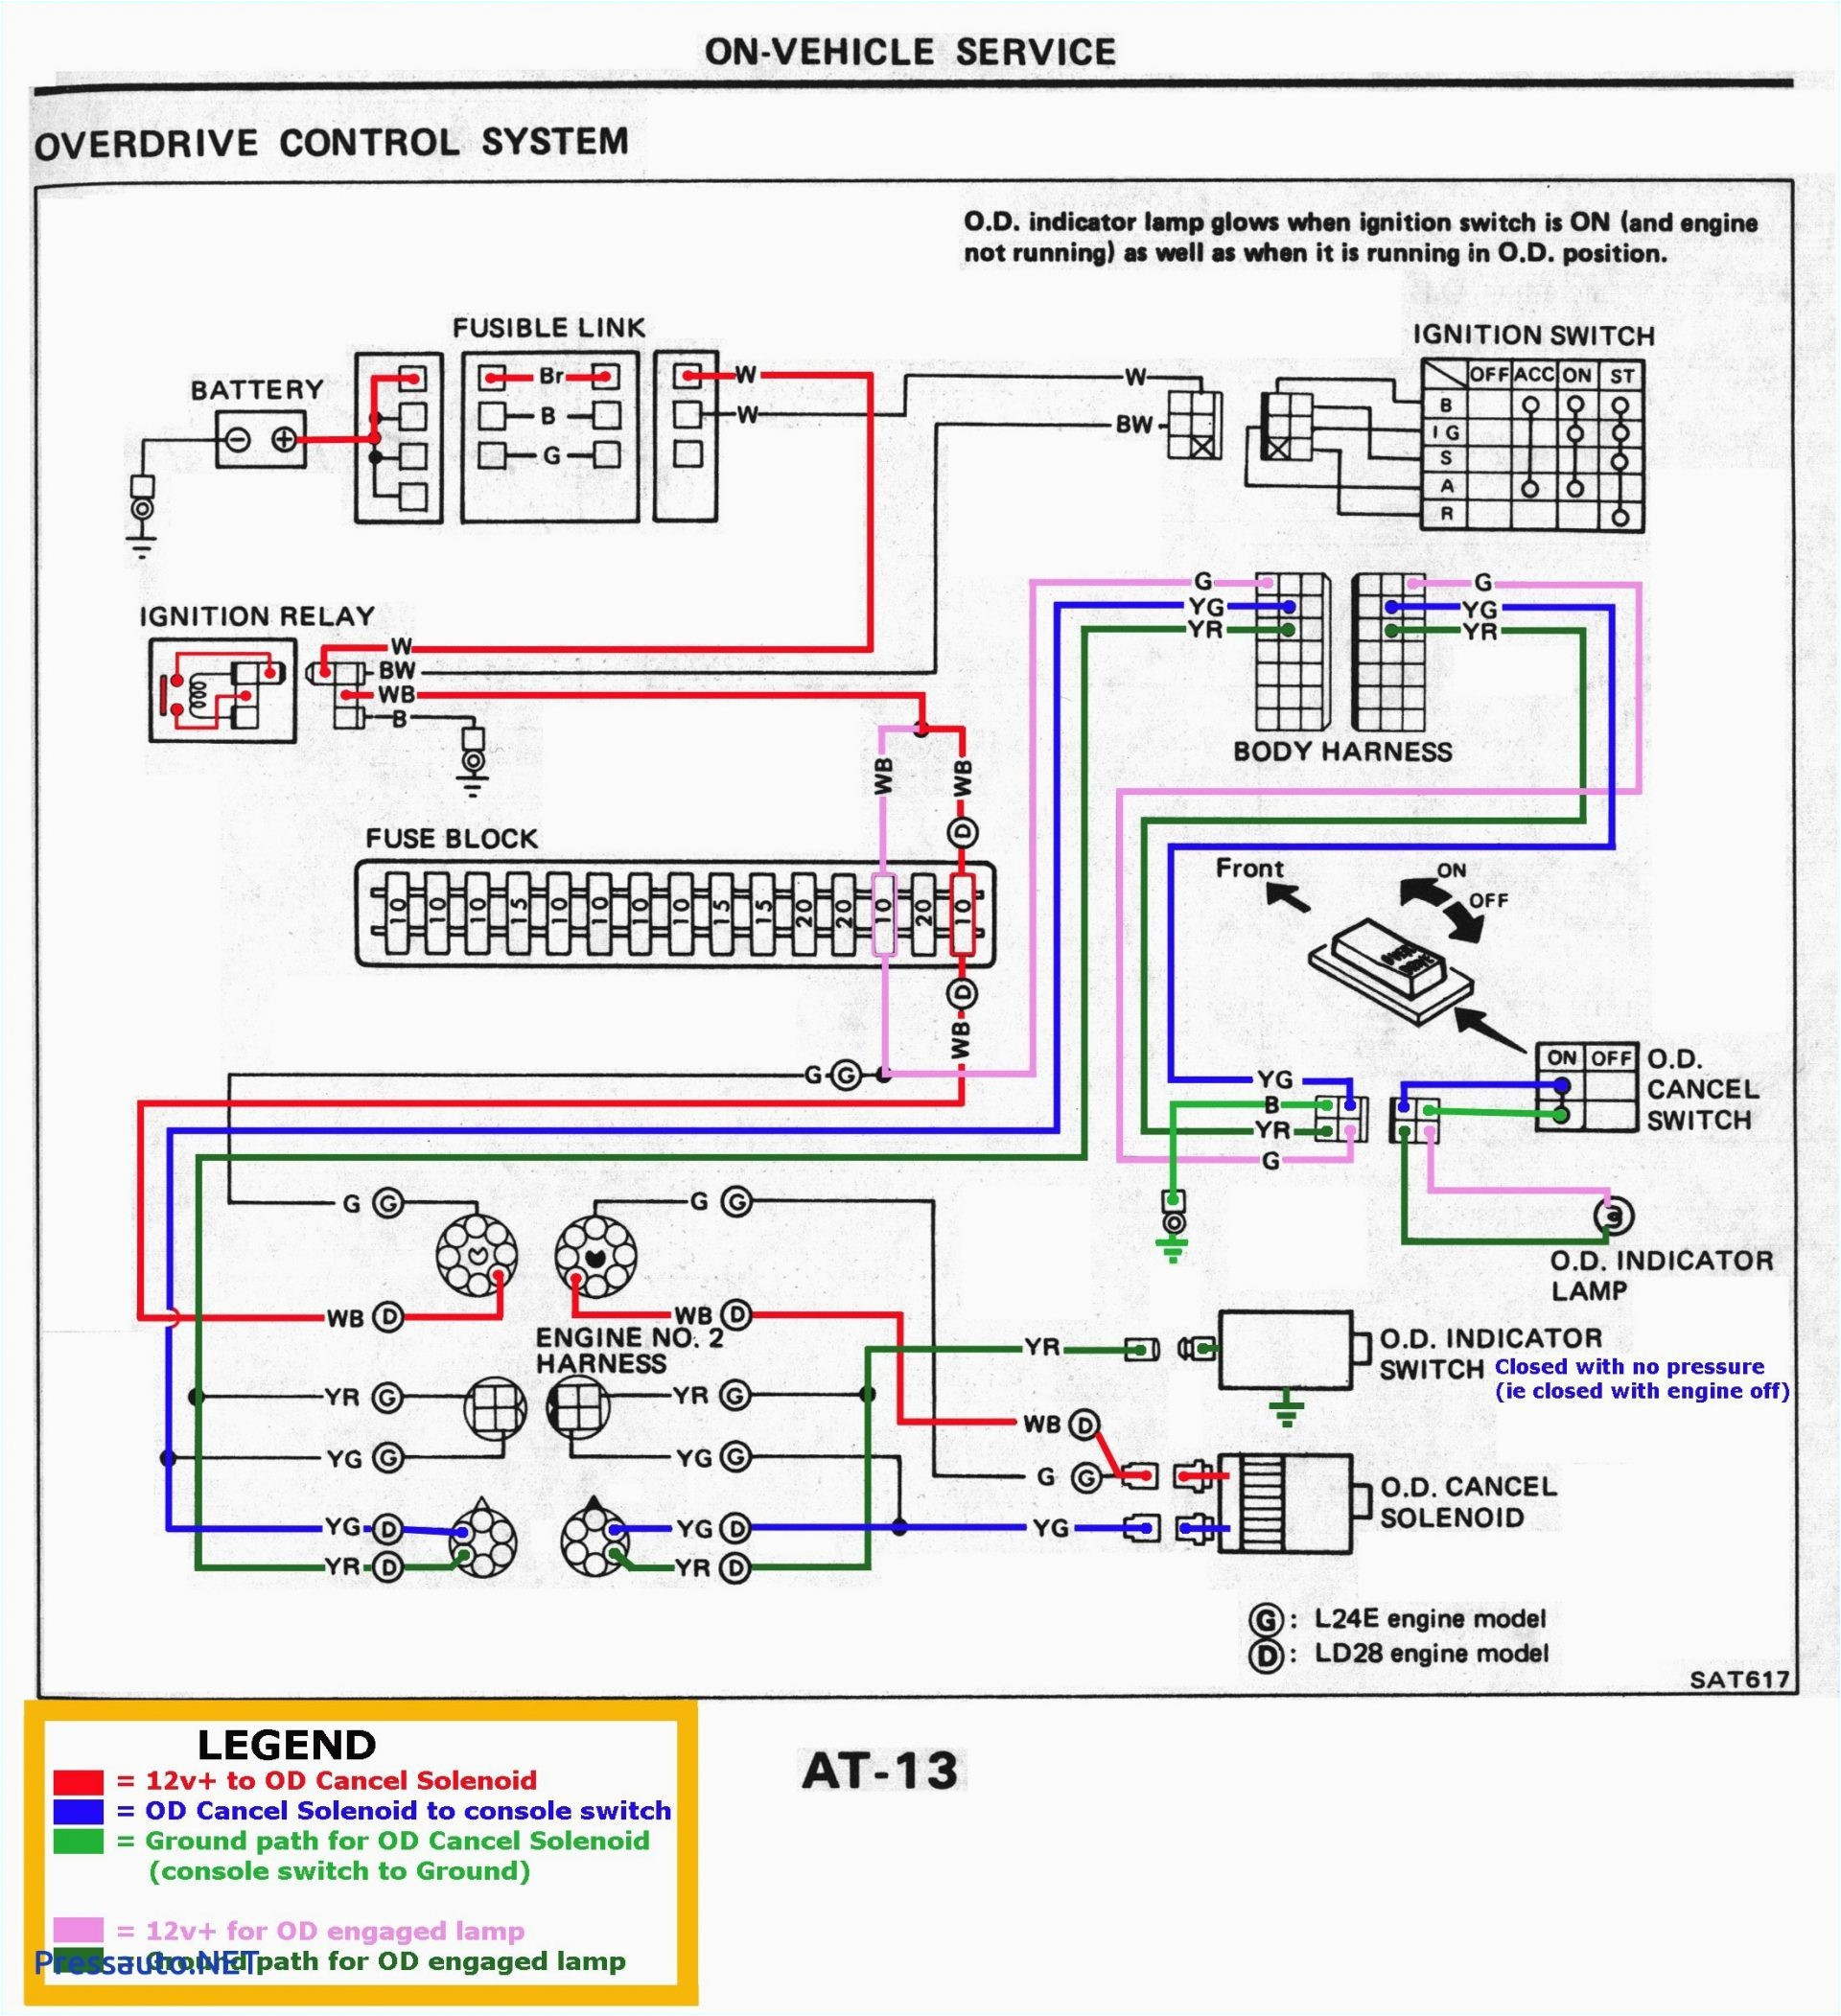 tail light wiring diagram chevy awesome chevy silverado tail light wiring diagram new wiring diagram for